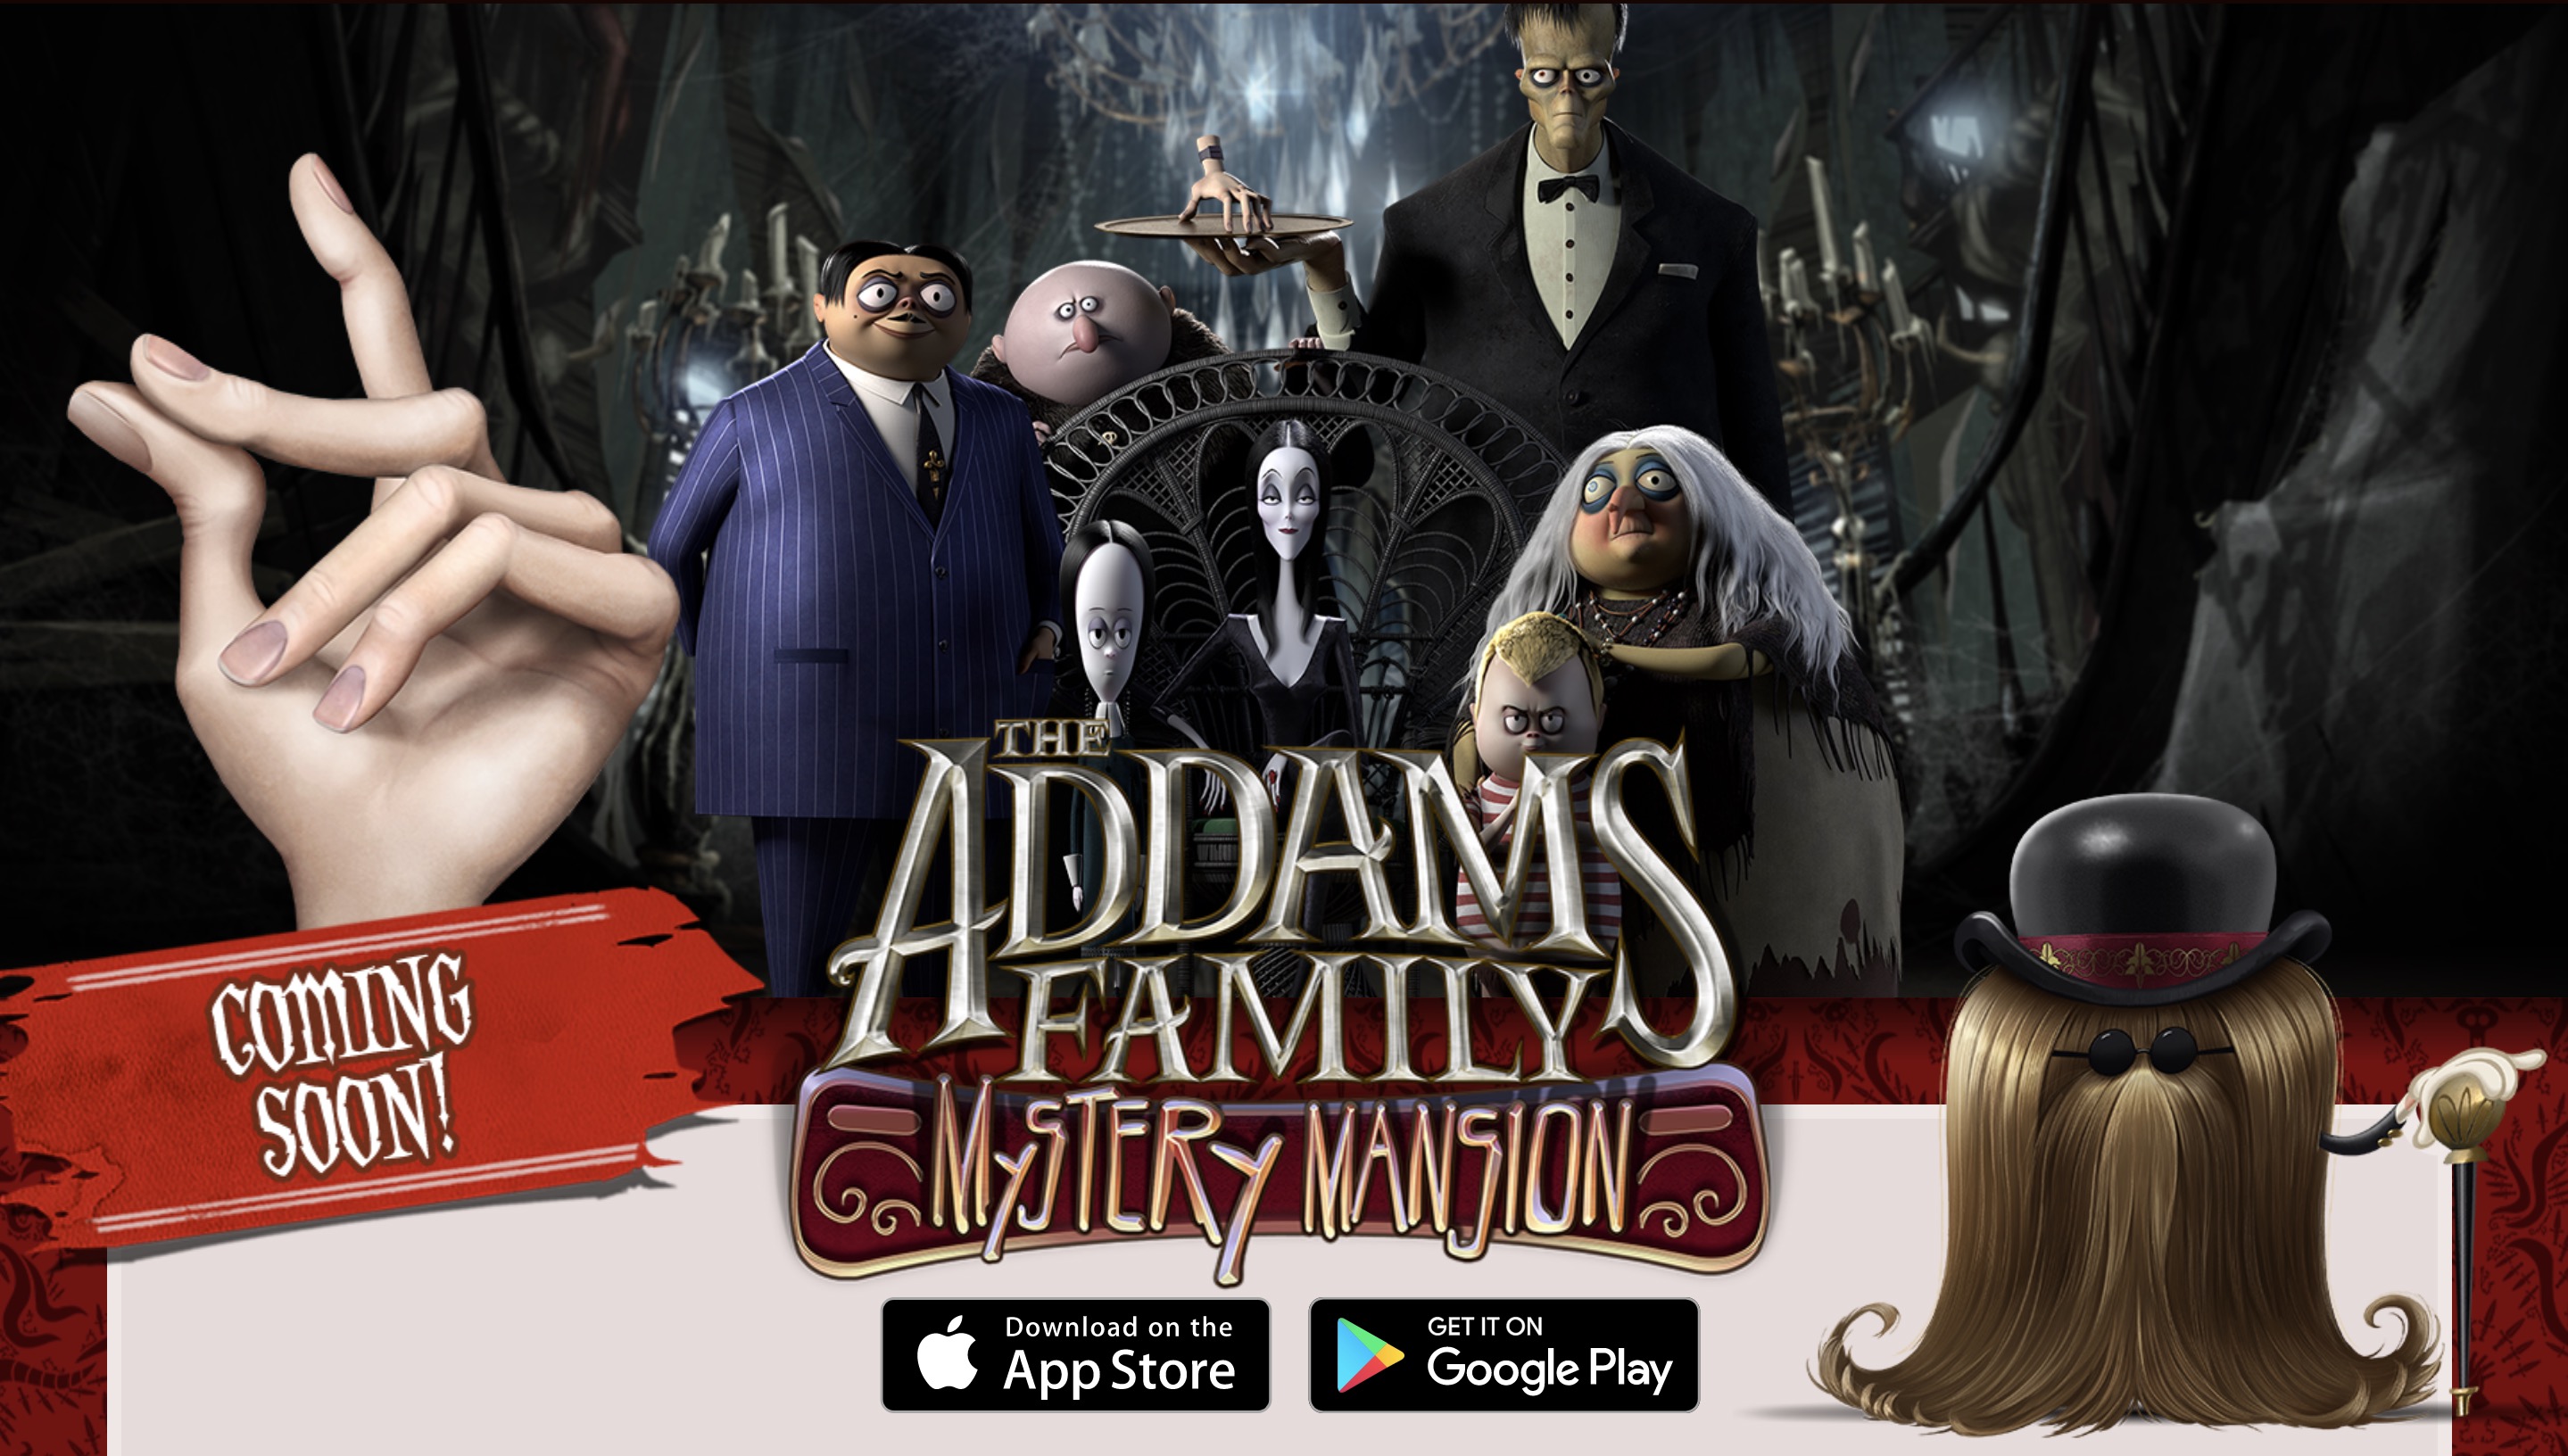 The Addams Family Mystery Mansion' is an Upcoming Mobile Game Based on the  Upcoming Addams Family Animated Movie – TouchArcade